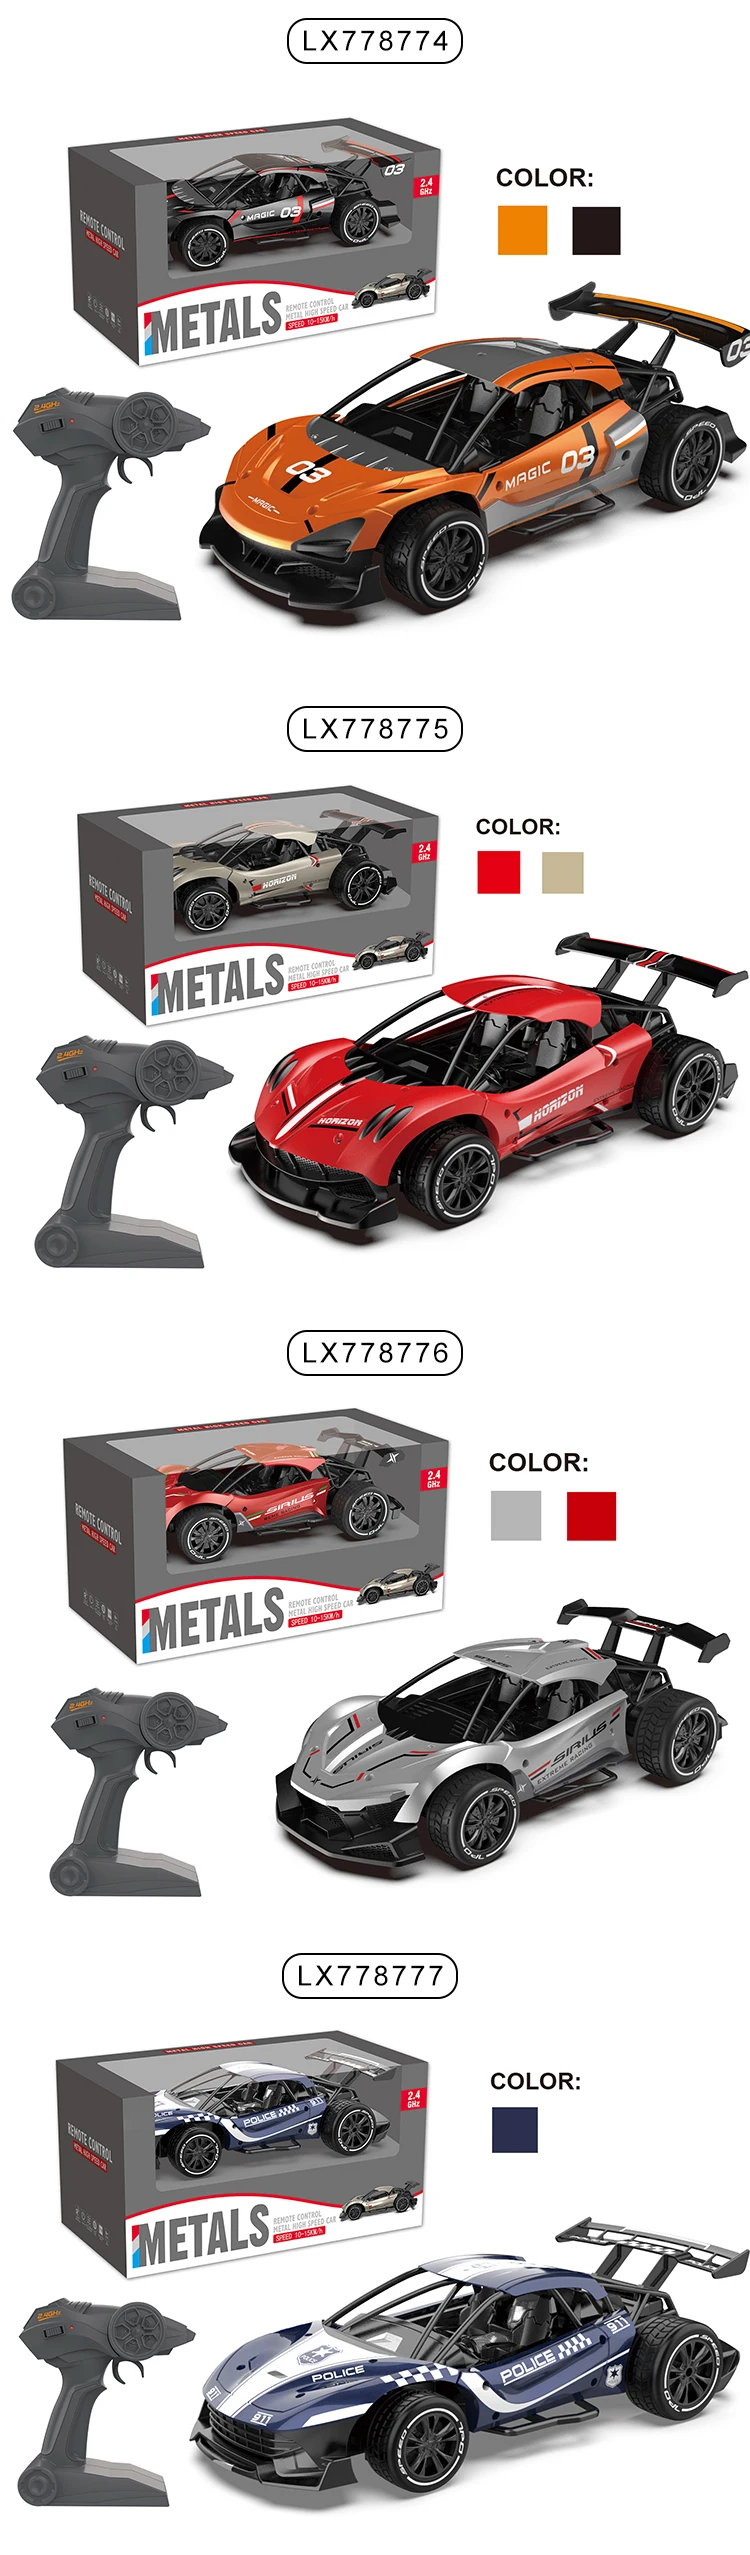 2.4GHz Alloy RC toys Speed 10-15km/h Remote Control Metal High Speed Car